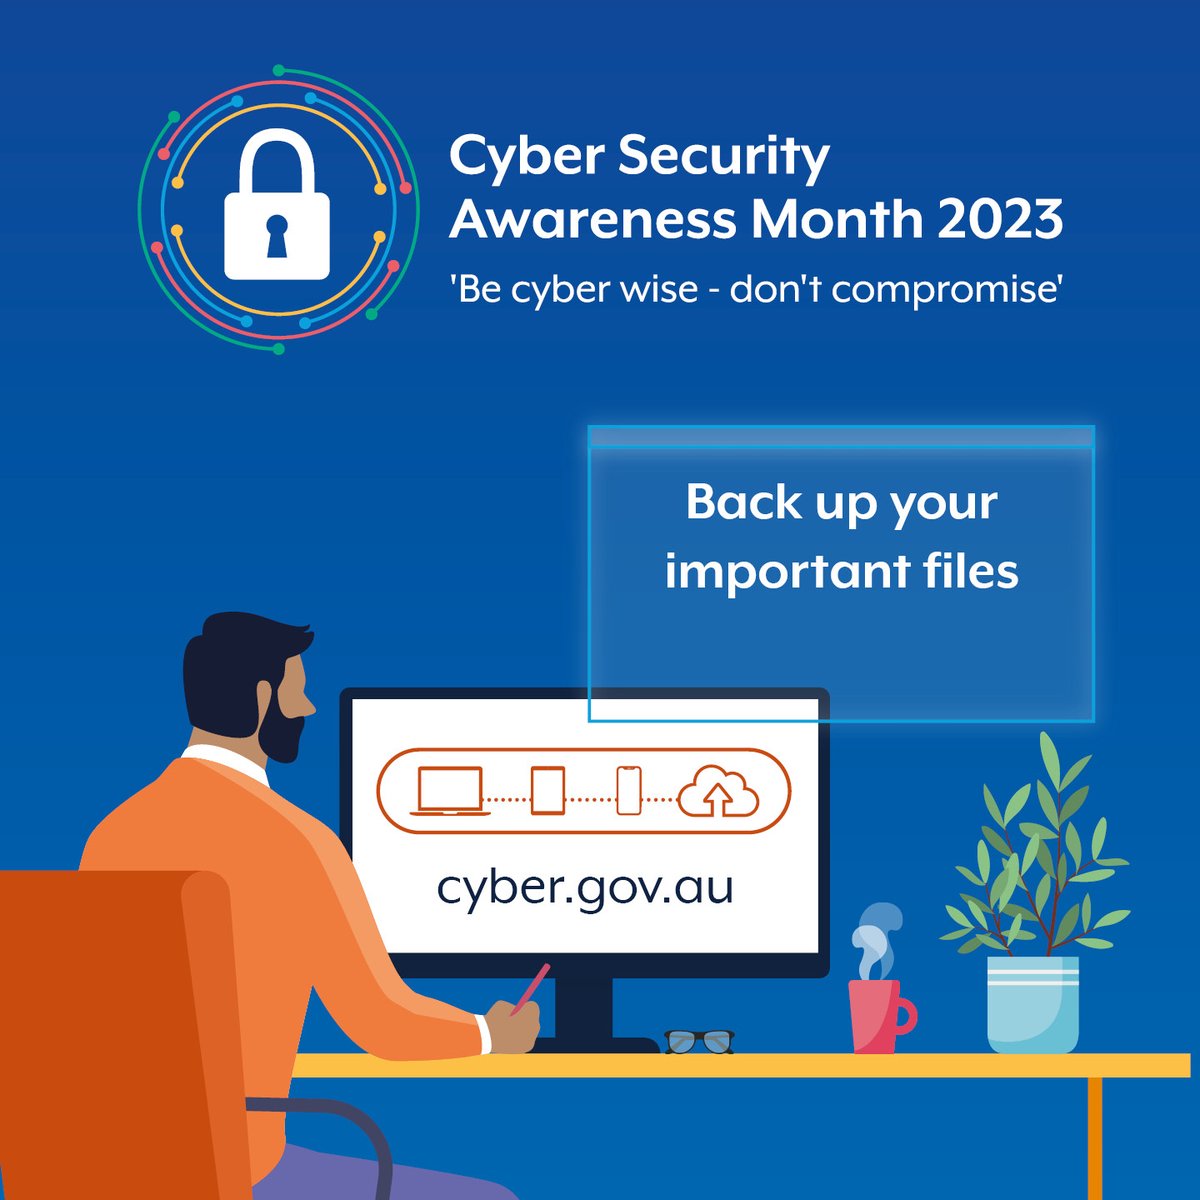 The Australian Cyber Security Centre’s tip of the week is to set up and perform regular backups of important files. Backing up and having backups mean you can restore your files if something goes wrong. Find out more at cyber.gov.au #CyberSecurityAwarenessMonth2023